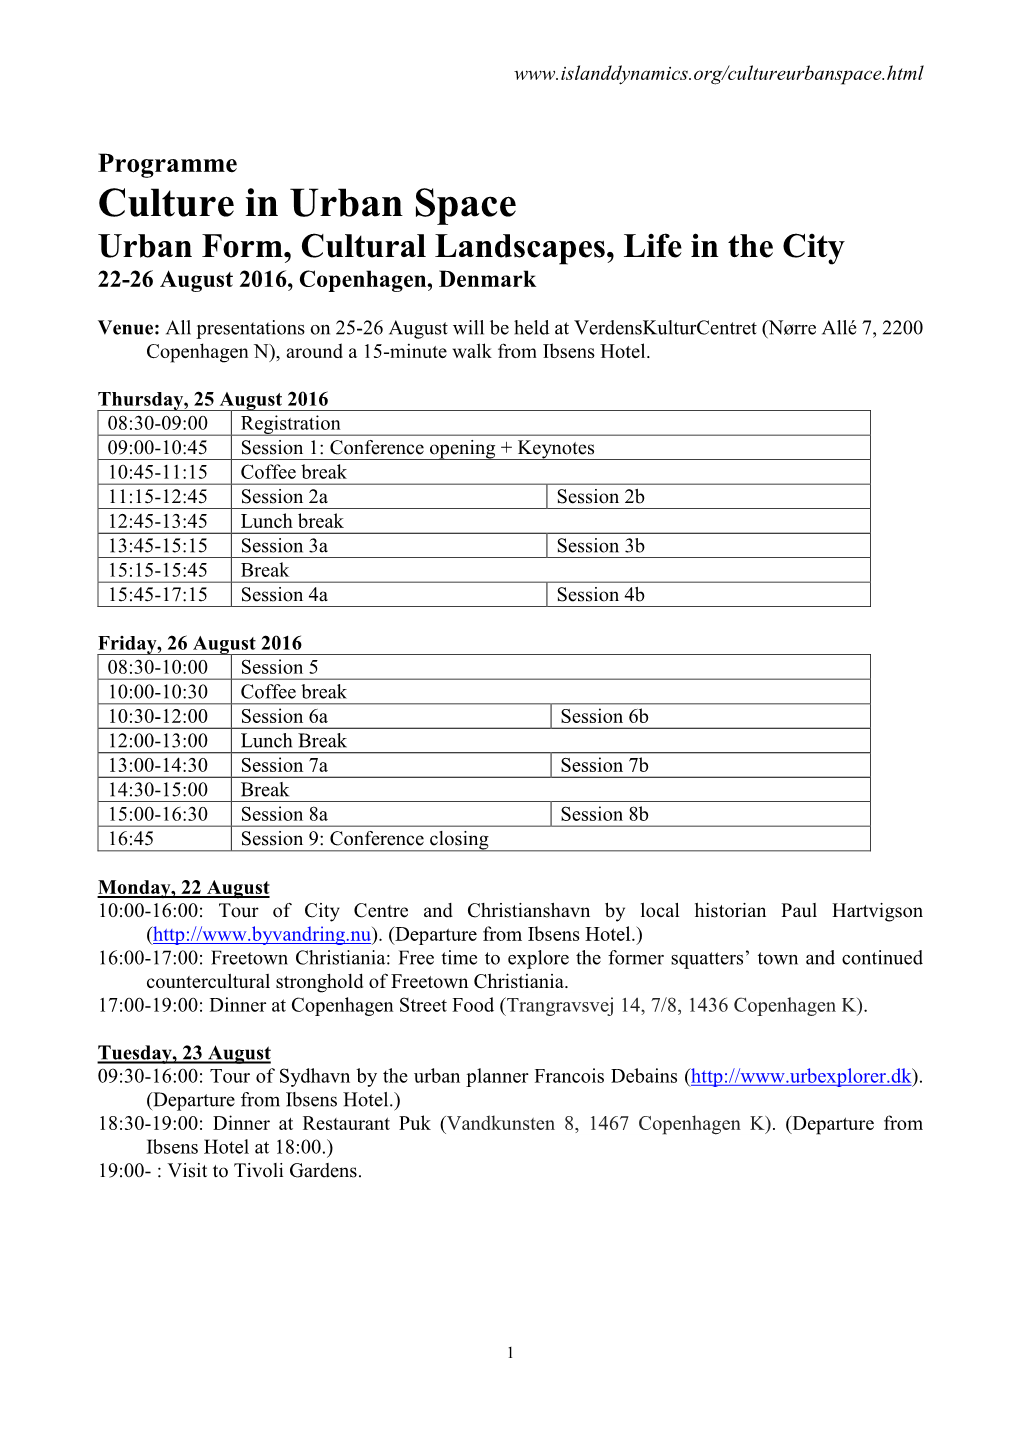 Programme Culture in Urban Space Urban Form, Cultural Landscapes, Life in the City 22-26 August 2016, Copenhagen, Denmark